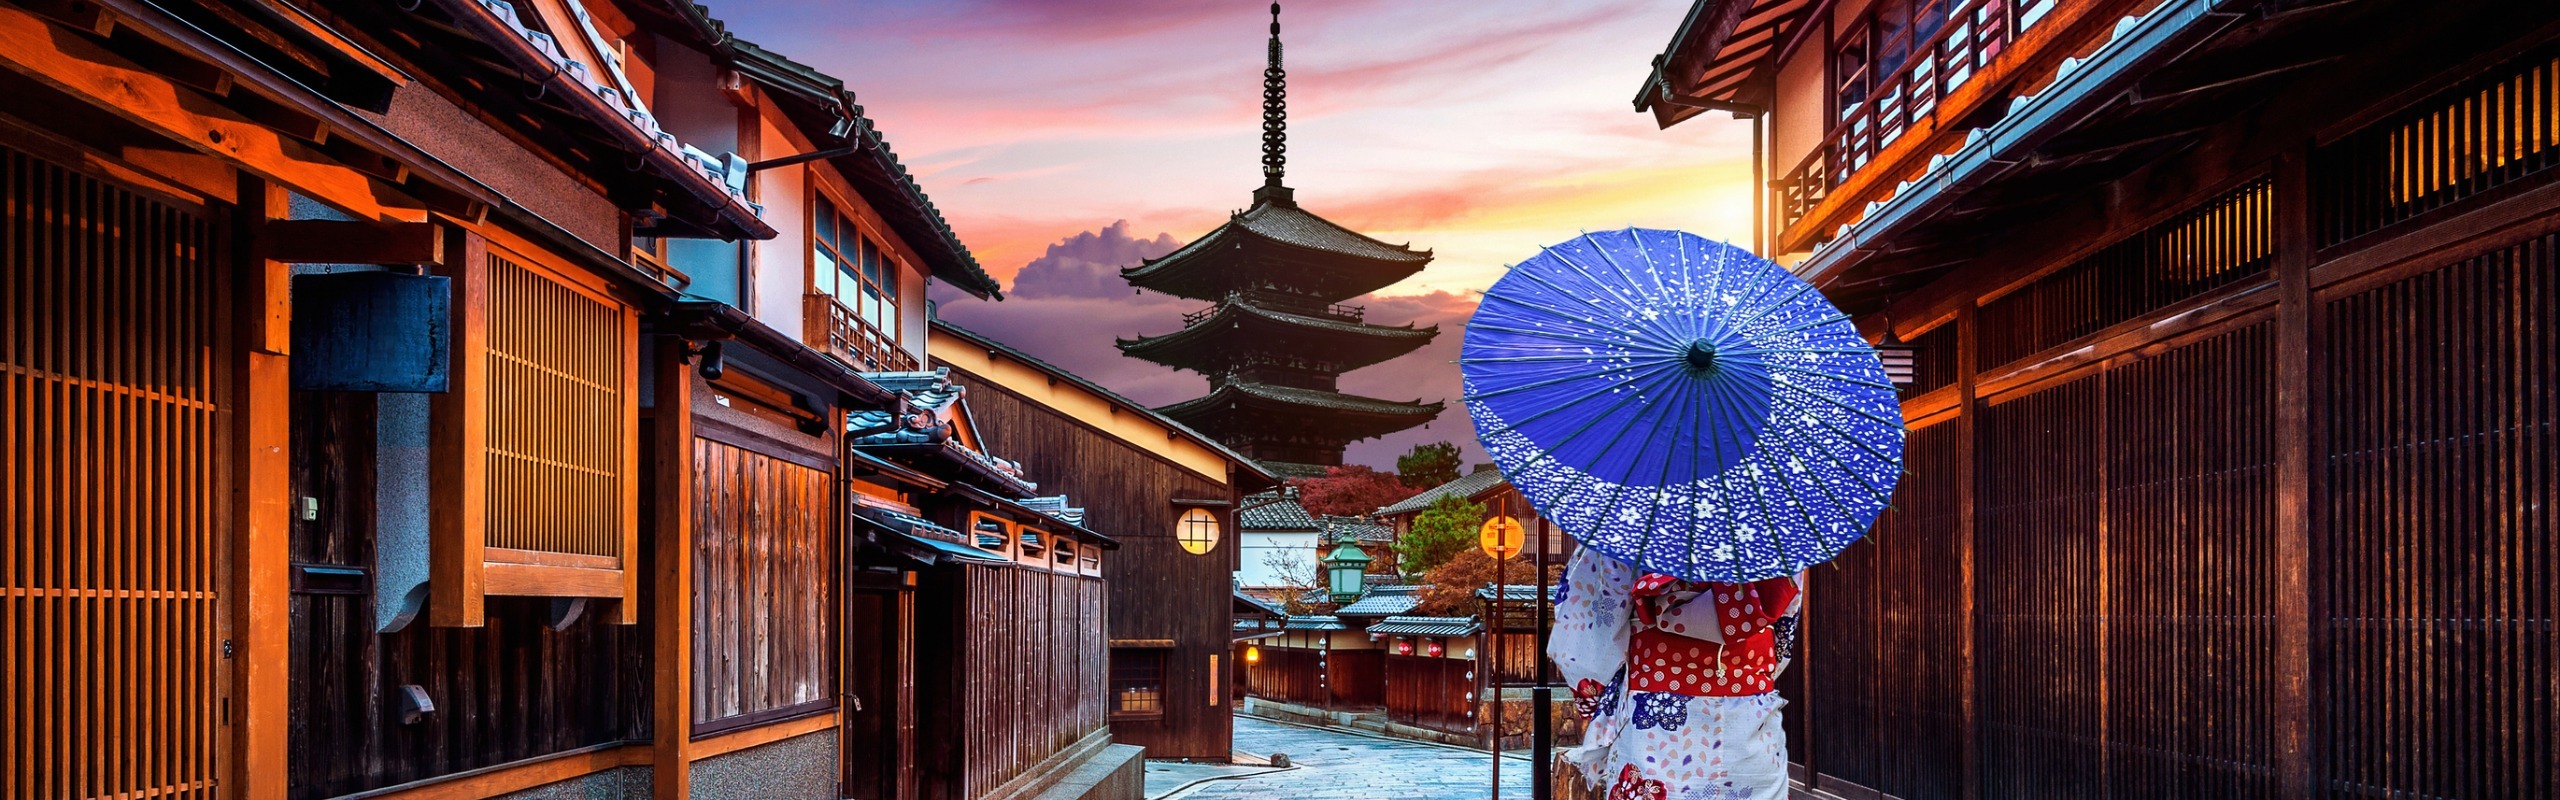 The Top 5 Itineraries for One Week in Japan